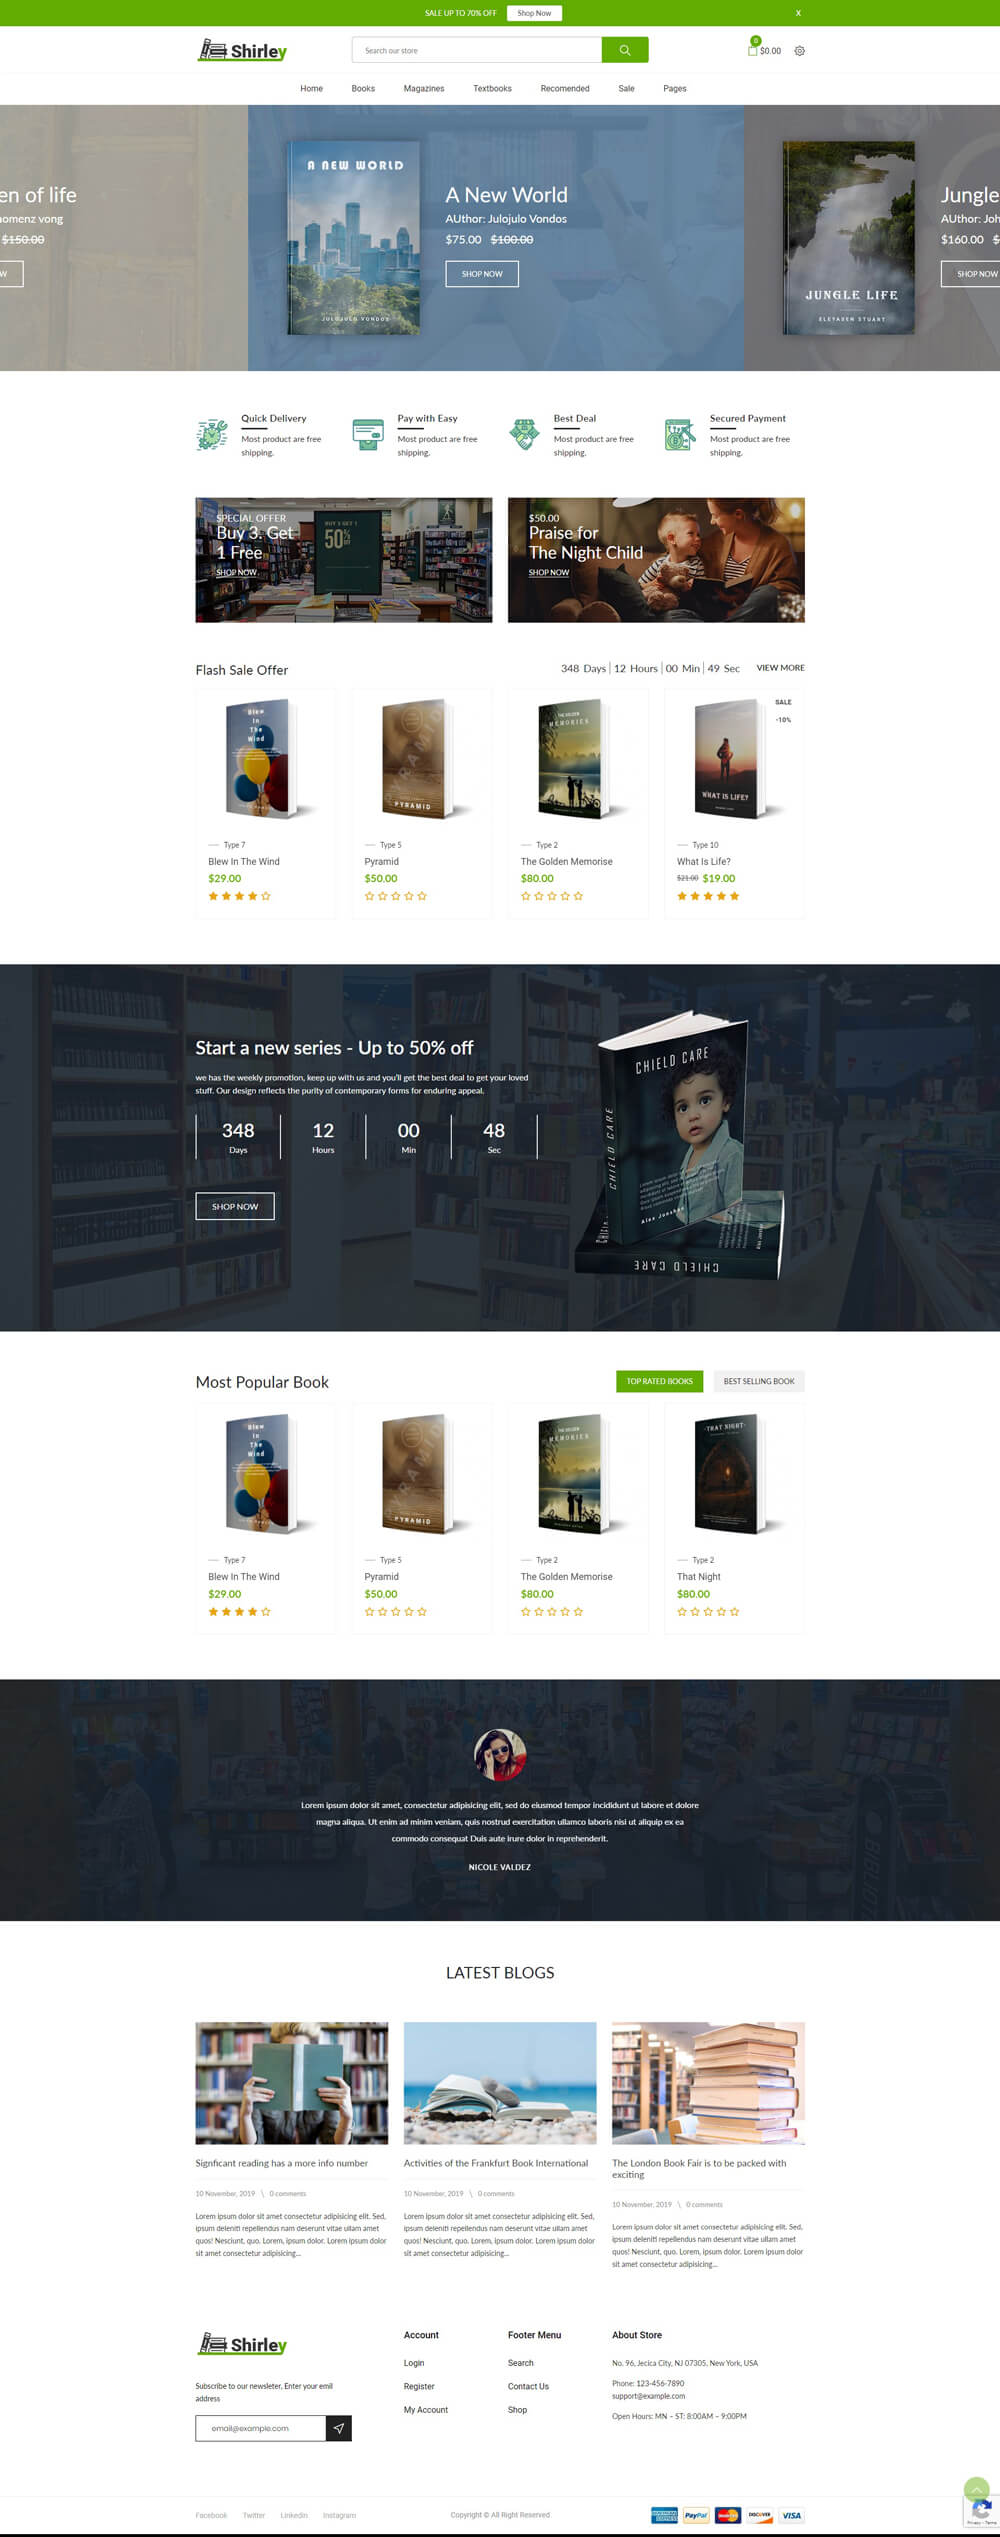 Shirley – Book Store Shopify Theme